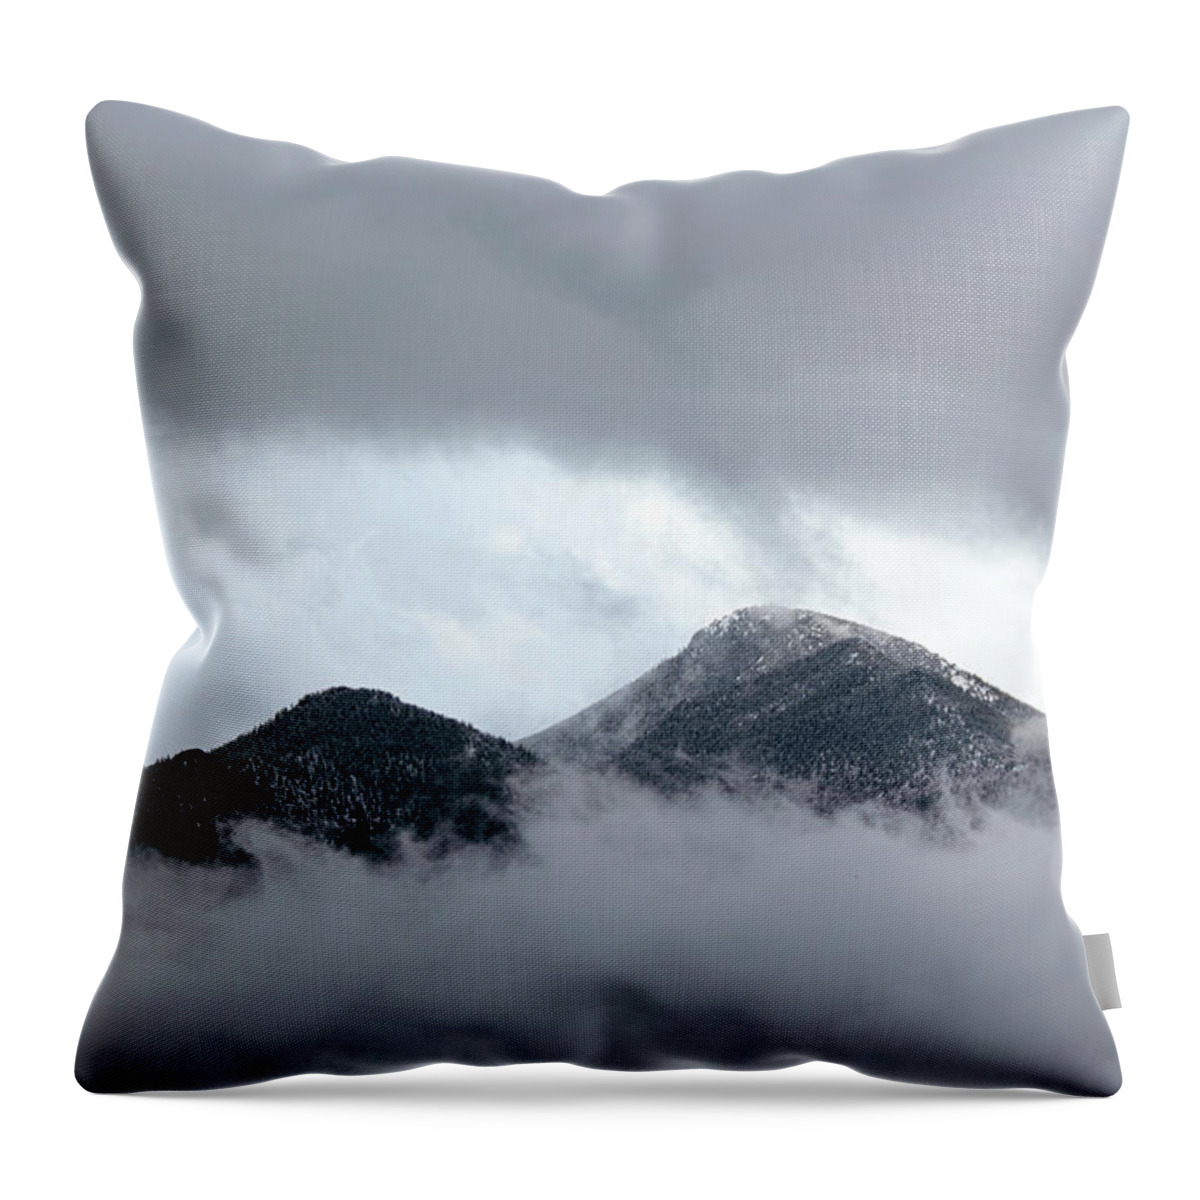 Mountain Throw Pillow featuring the photograph Peaking Through The Clouds by Shane Bechler